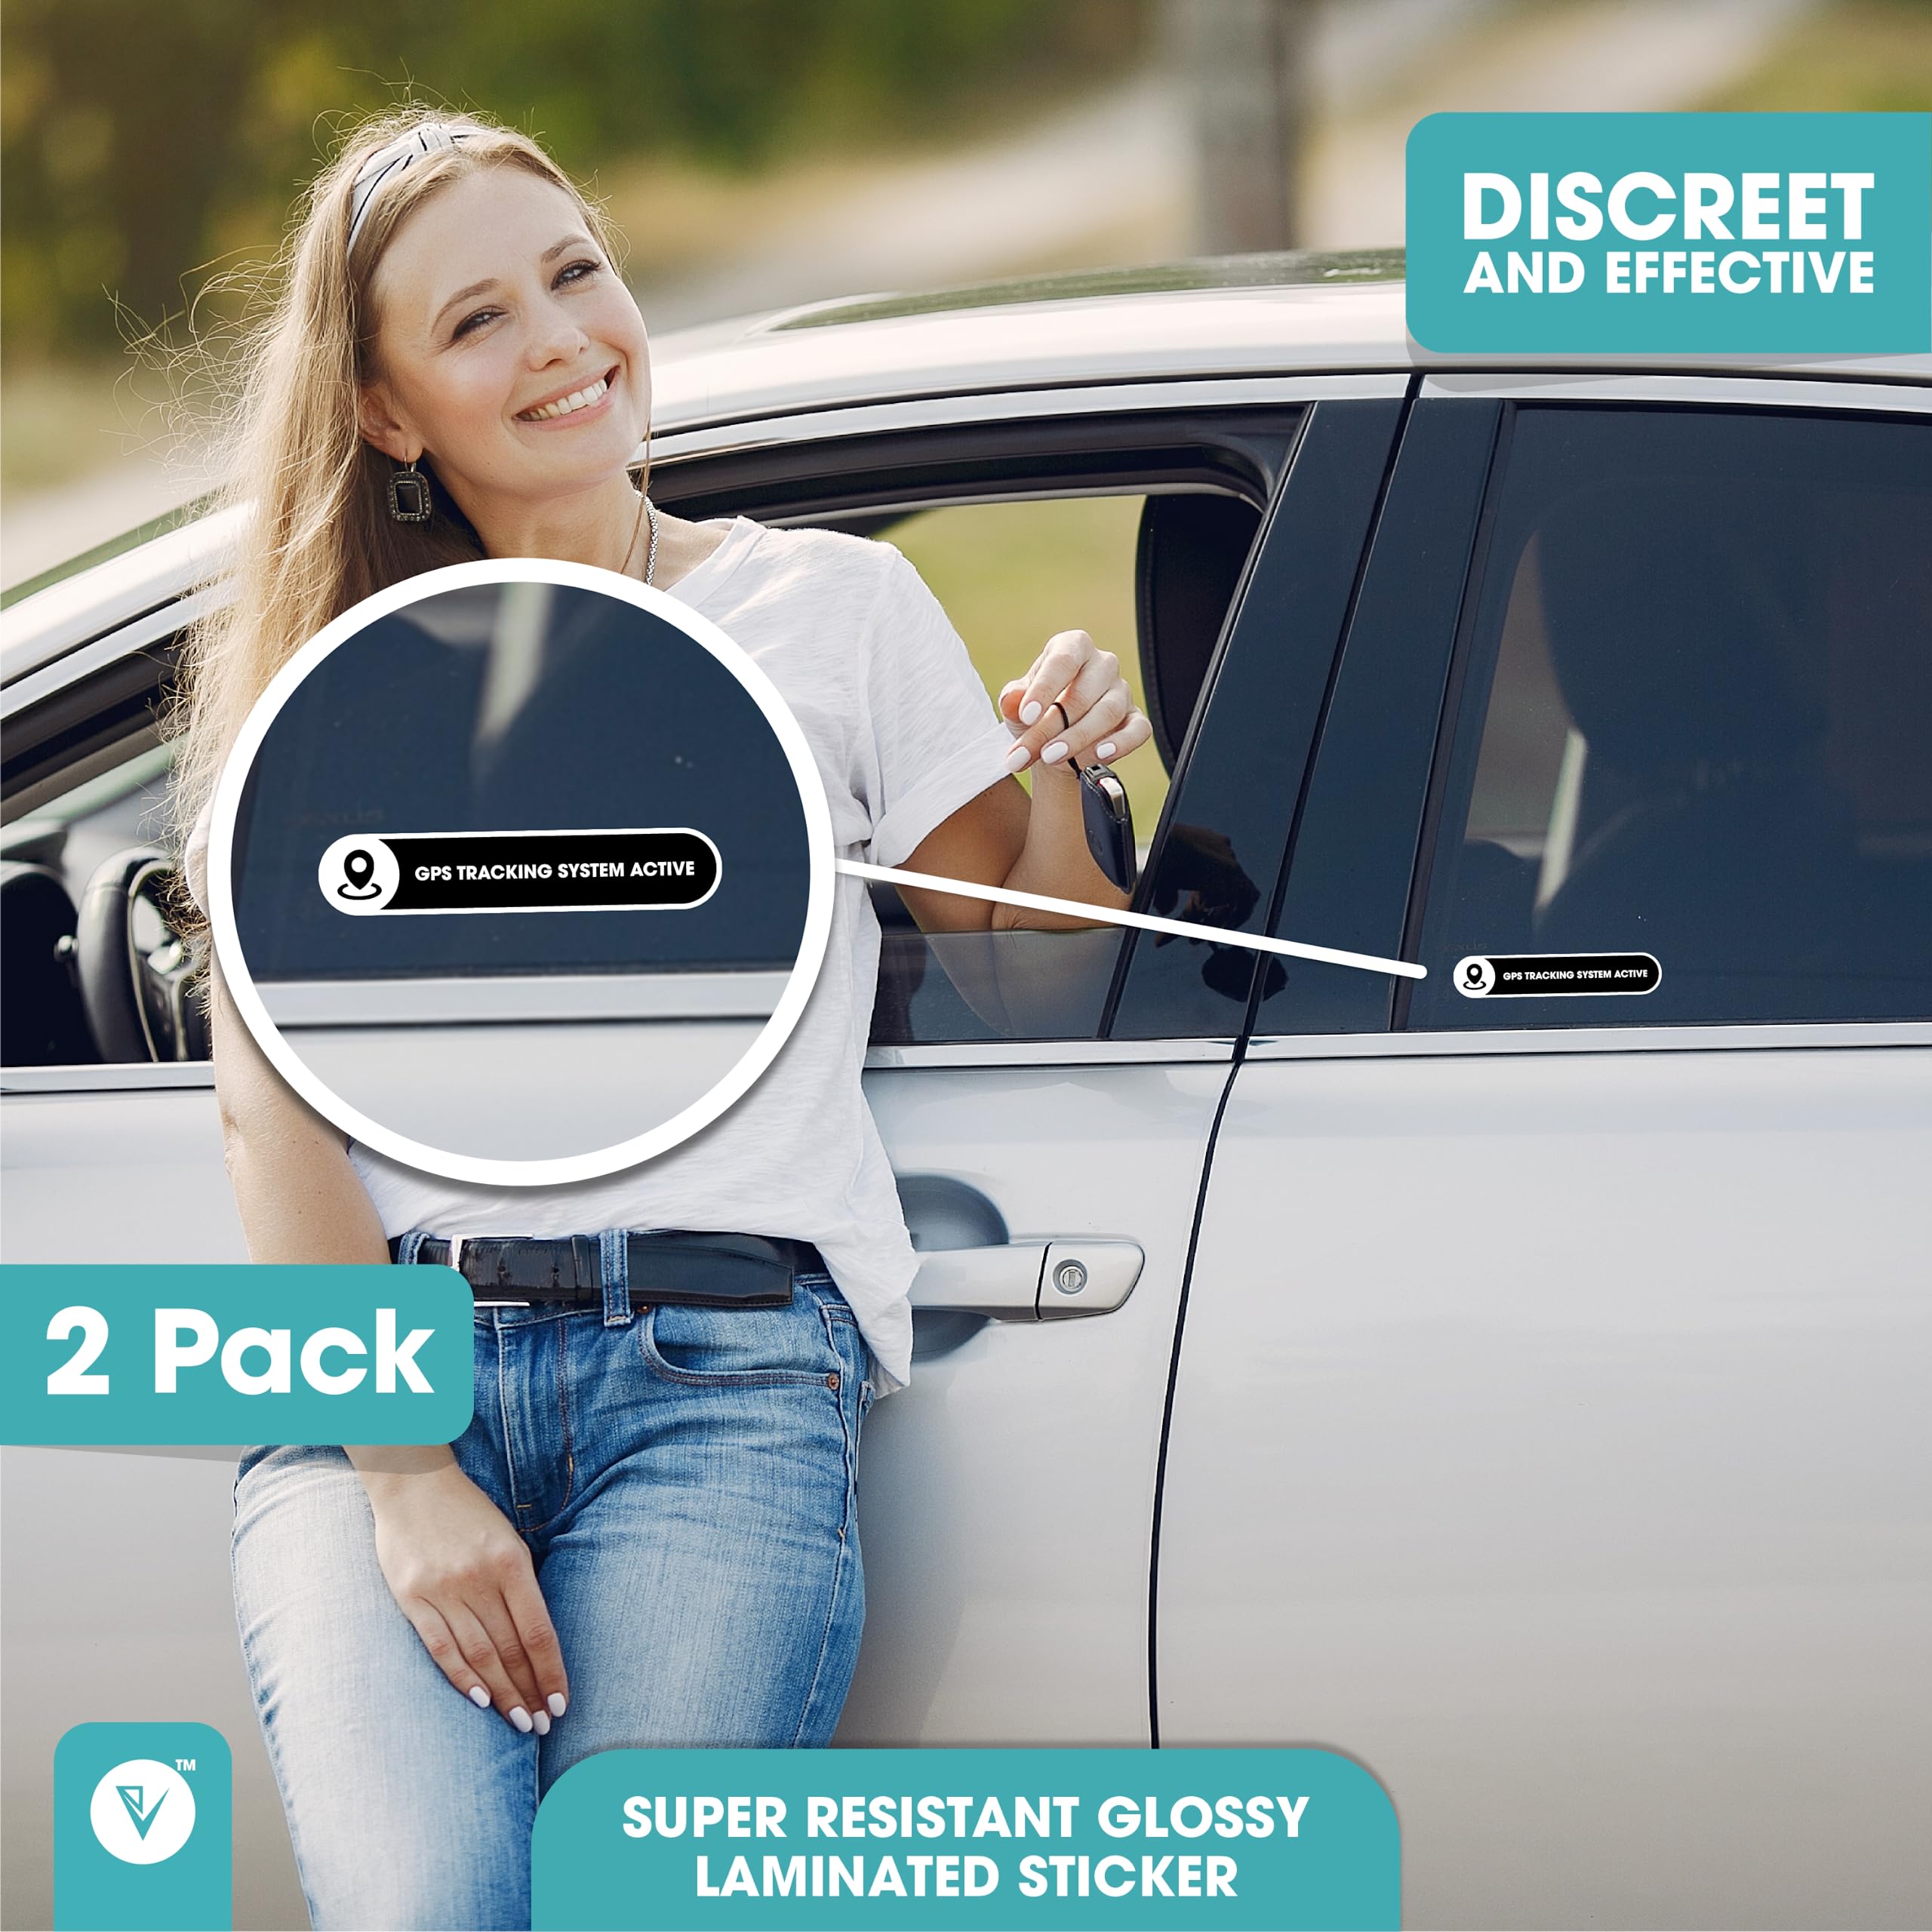 Small 2 Pack GPS Tracking System Sticker | GPS Active Sign for Cars | Car Window Sticker Sign | Black Glossy 5x1 Inches Waterproof Vinyl Sticker | Tracking System in Use | Anti Theft Security Sticker